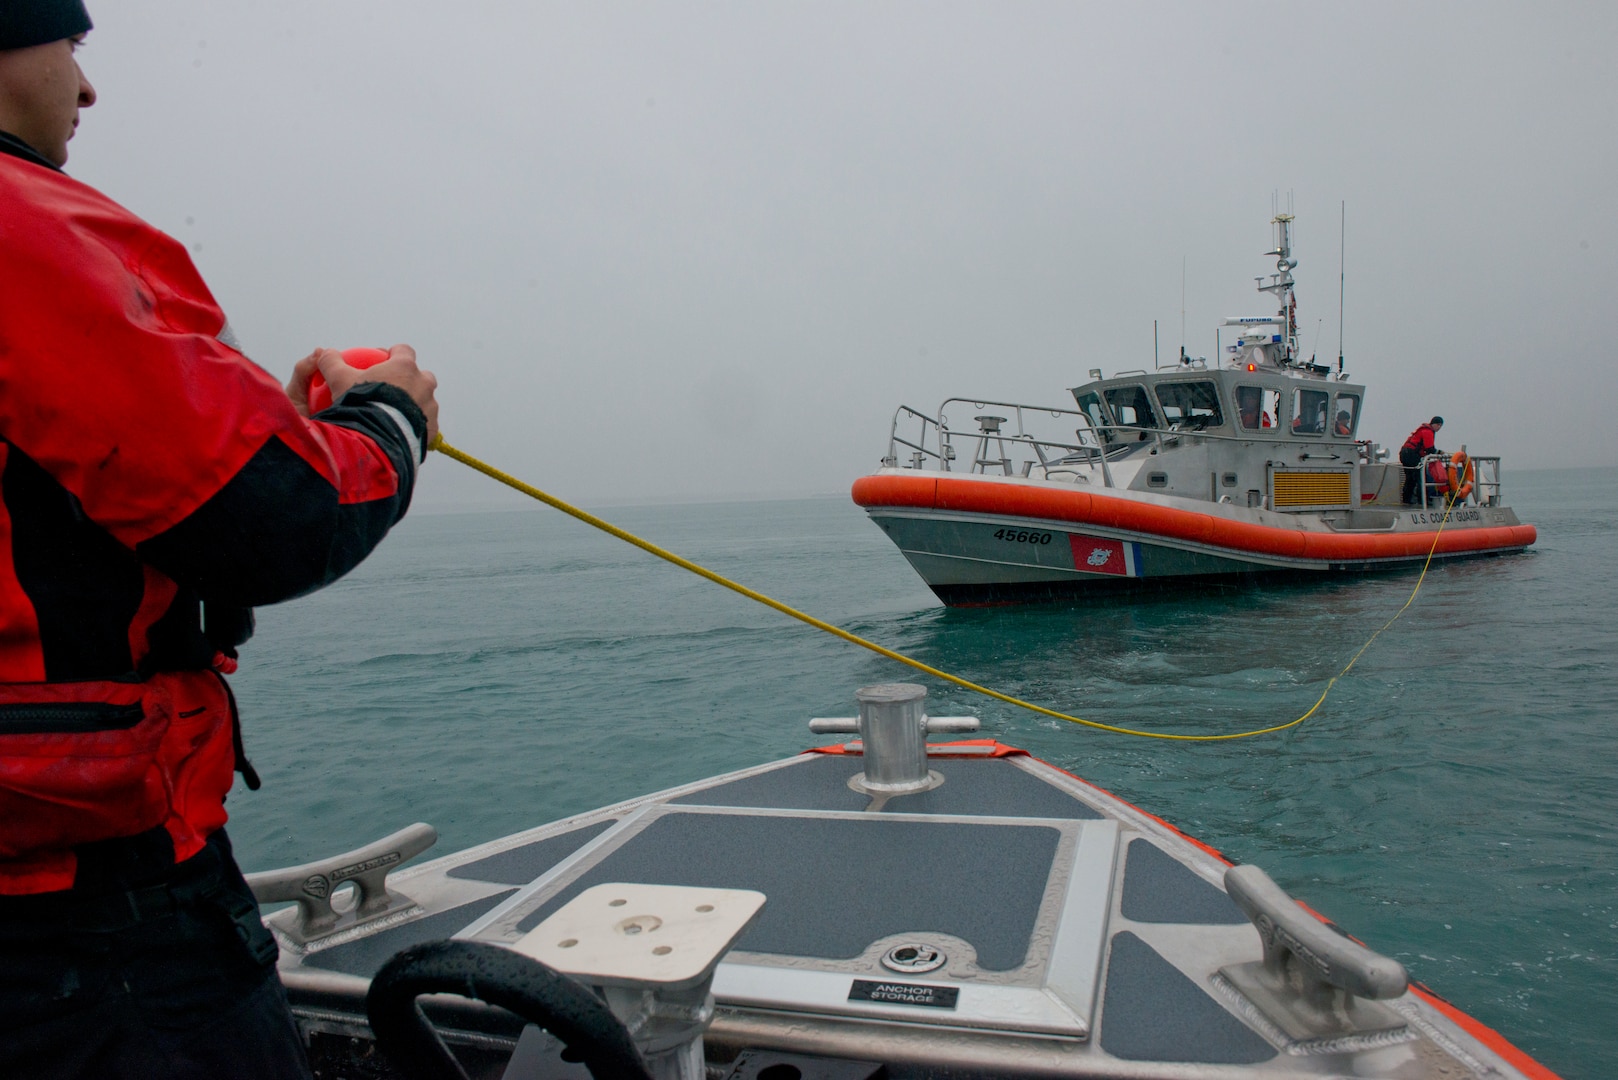 Coast Guard Petty Officer 3rd Class Alex Sheltra prepares to haul aboard a tow line after receiving a heaving line from a 45-foot Response Boat-Medium crew in the Port of Valdez, Alaska, Oct. 10, 2018. The  Station Valdez crews conducted training that included search patterns and vessel towing.